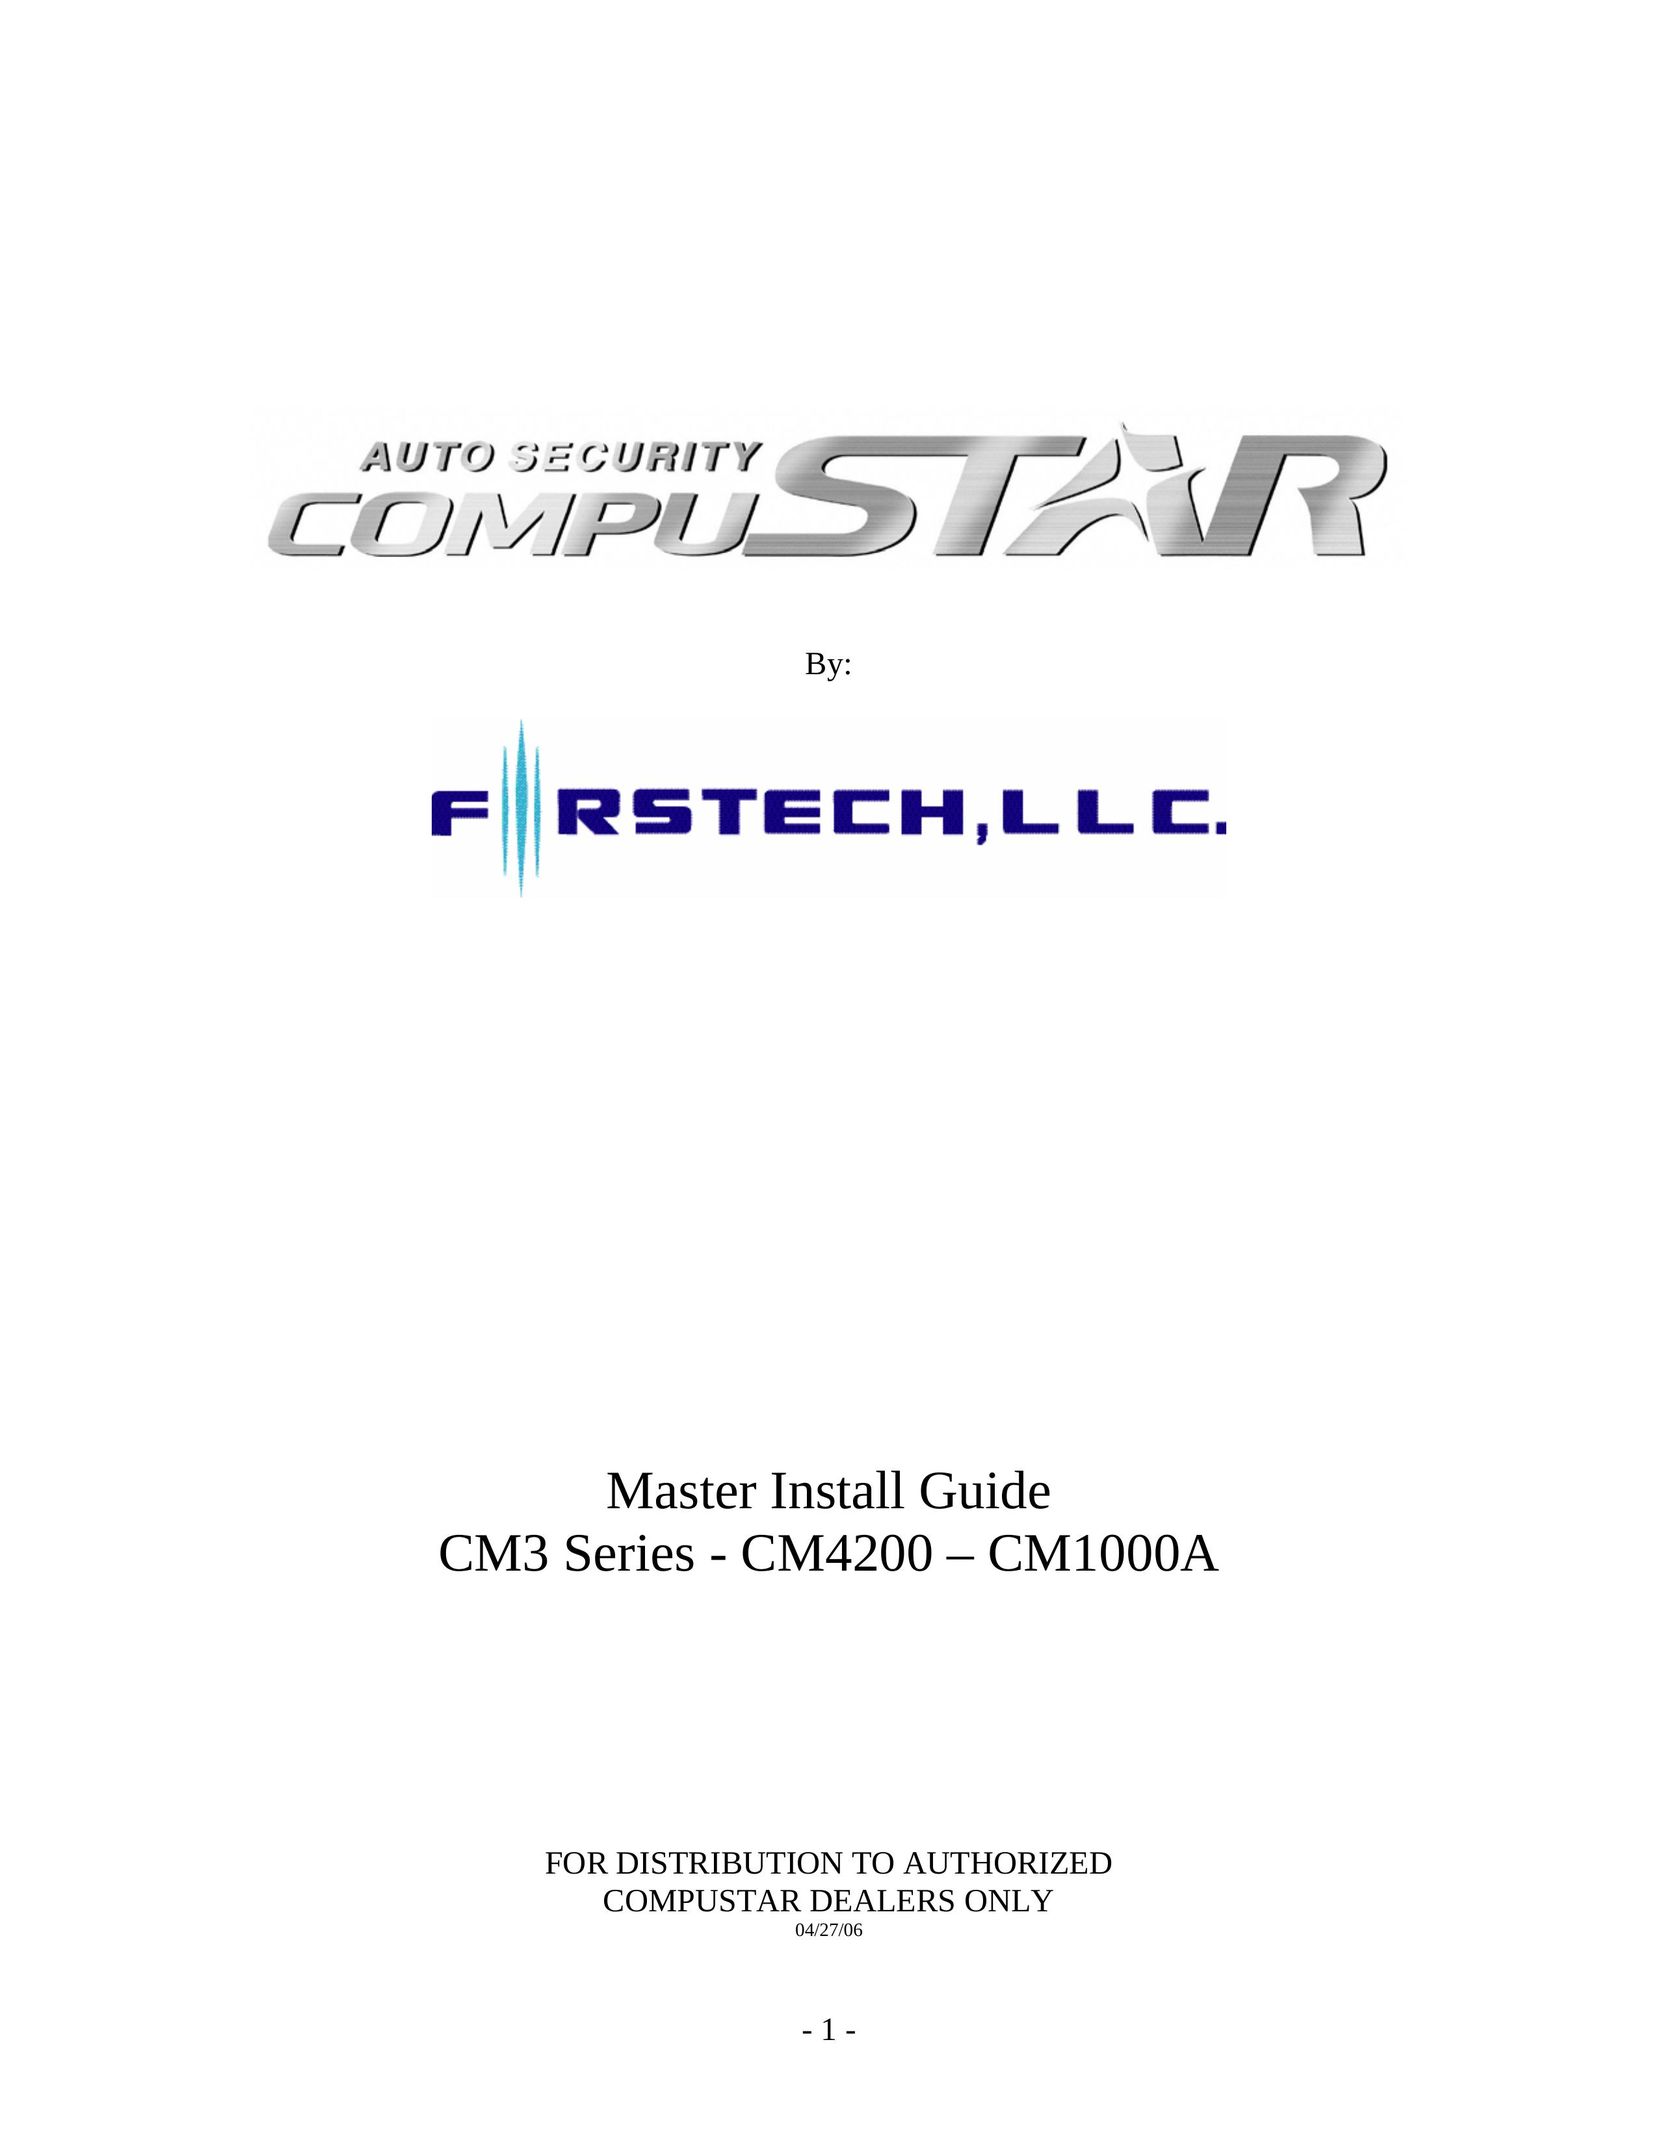 Firstech, LLC. CM1000A Flat Panel Television User Manual